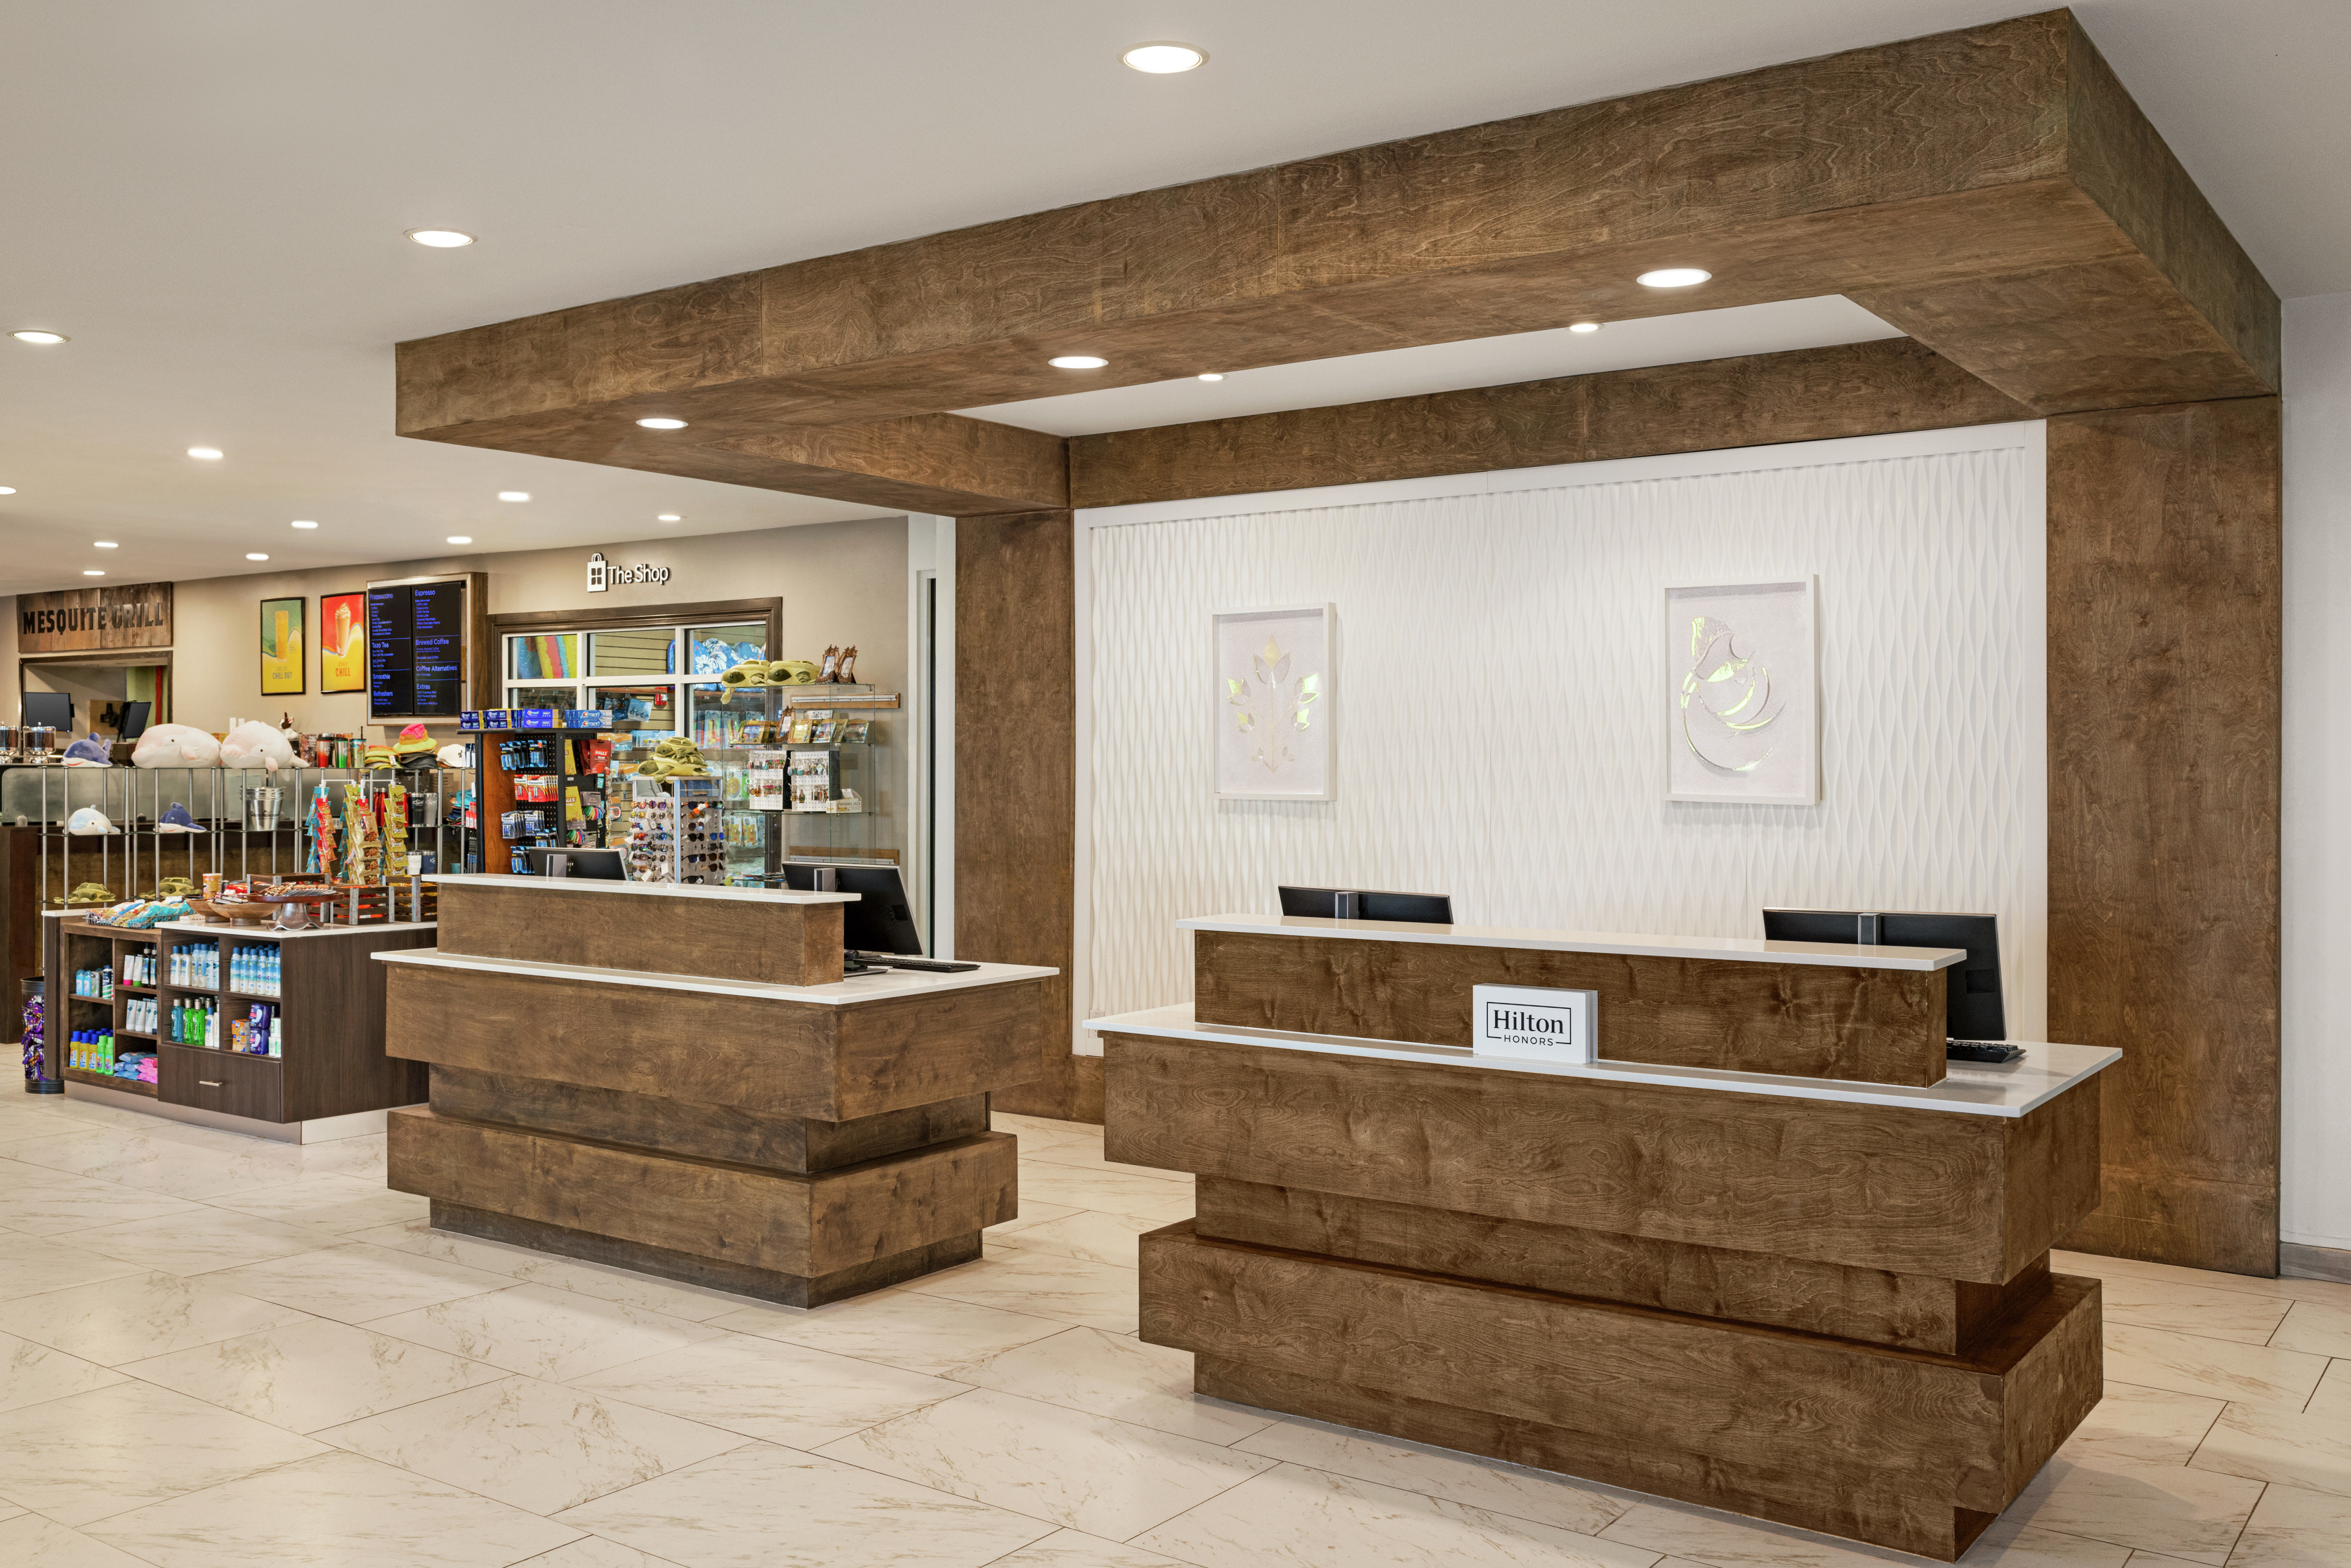 Welcoming hotel front desk and convenient on-site gift shop.